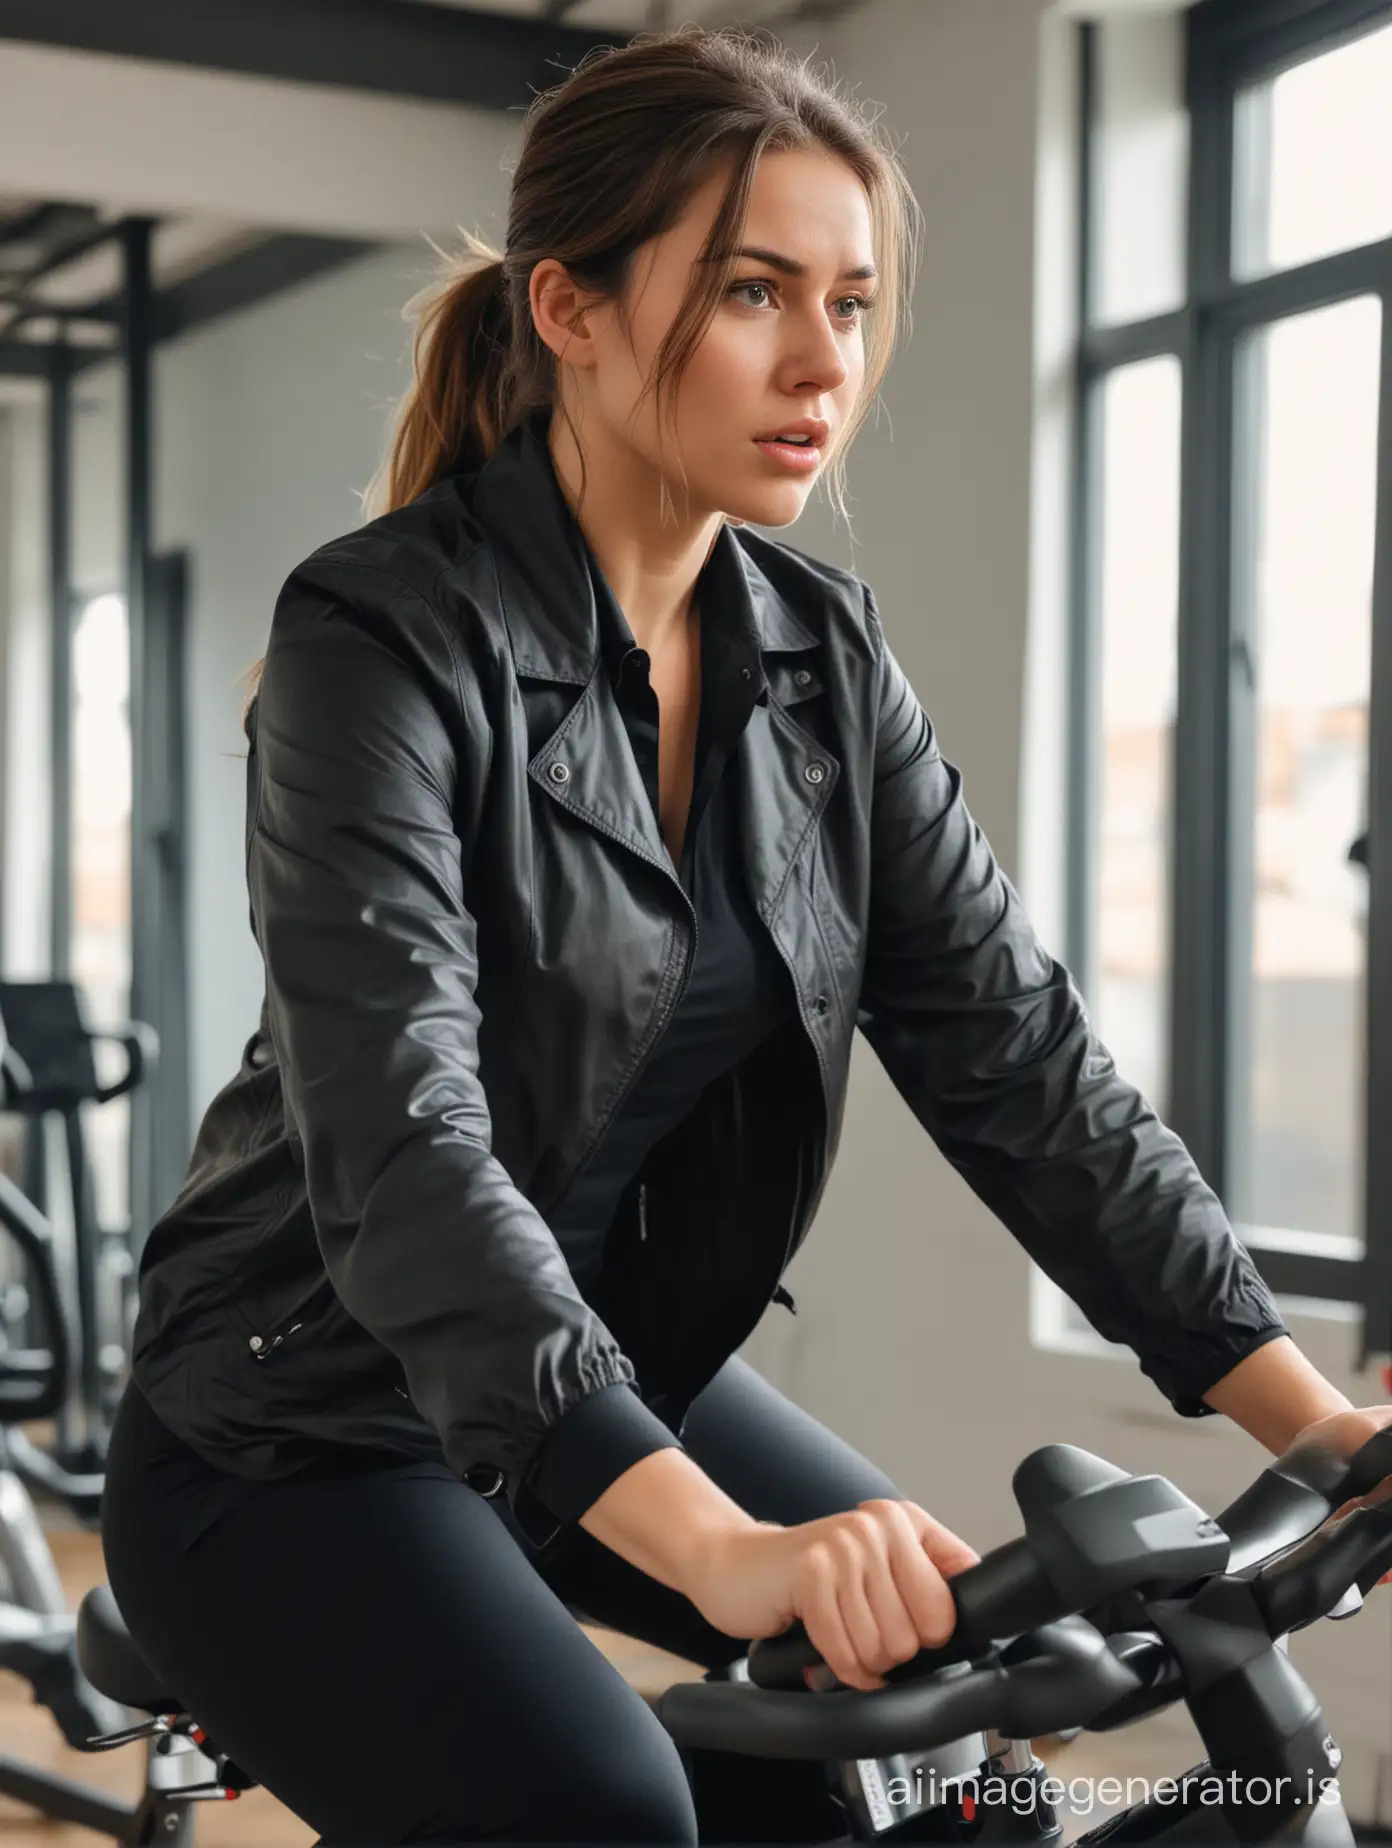 Anxious-Woman-Sweating-on-Exercise-Bike-in-Gym